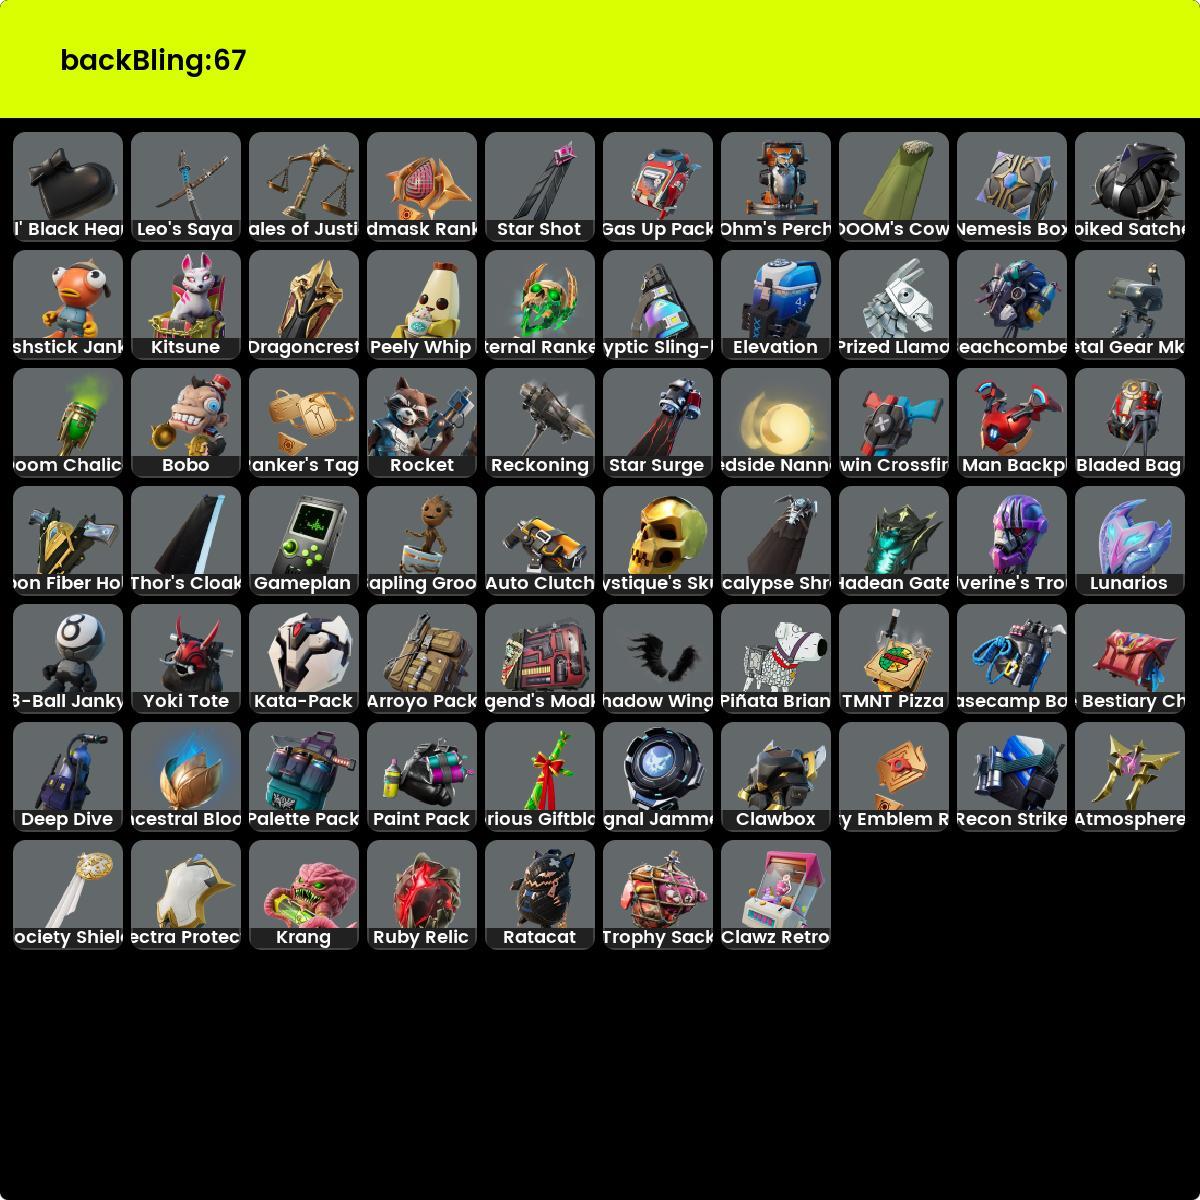 45 SKINS FULL ACCESS, SULTURA, FIXER, CLOUD STRIKER, BREAKPOINT